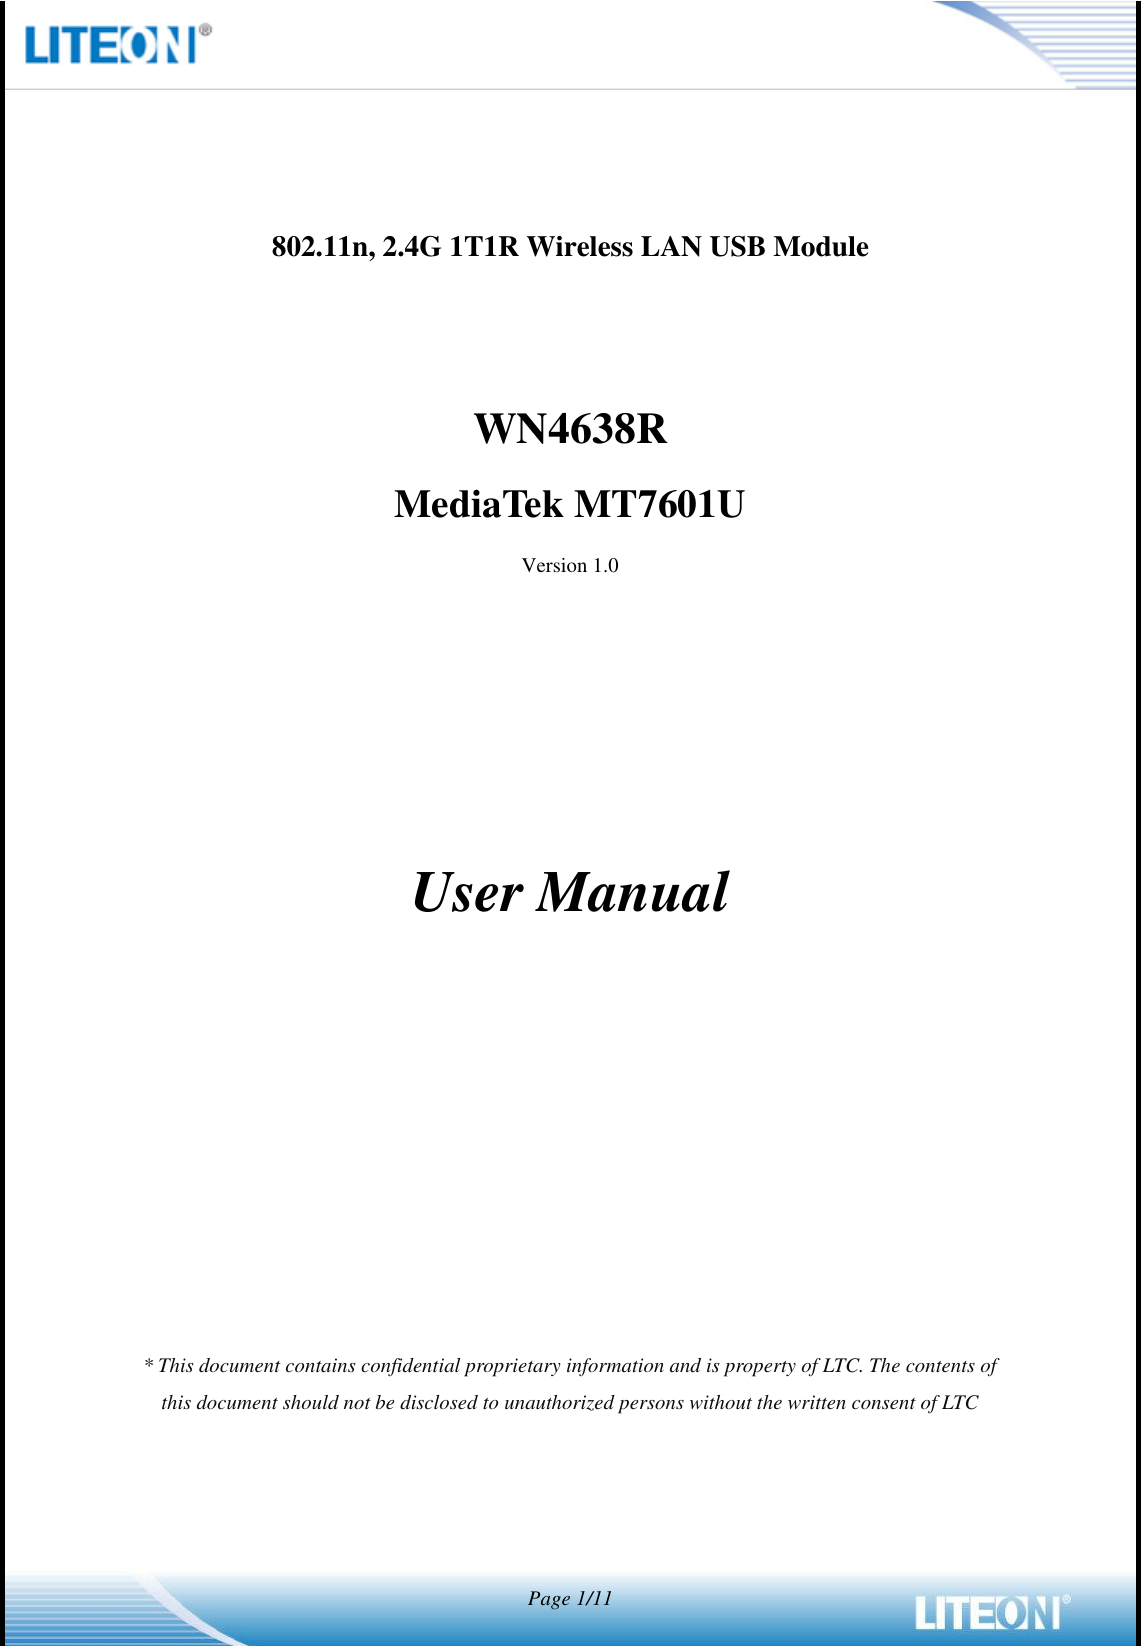   Page 1/11   802.11n, 2.4G 1T1R Wireless LAN USB Module   WN4638R MediaTek MT7601U Version 1.0        User Manual            * This document contains confidential proprietary information and is property of LTC. The contents of this document should not be disclosed to unauthorized persons without the written consent of LTC  